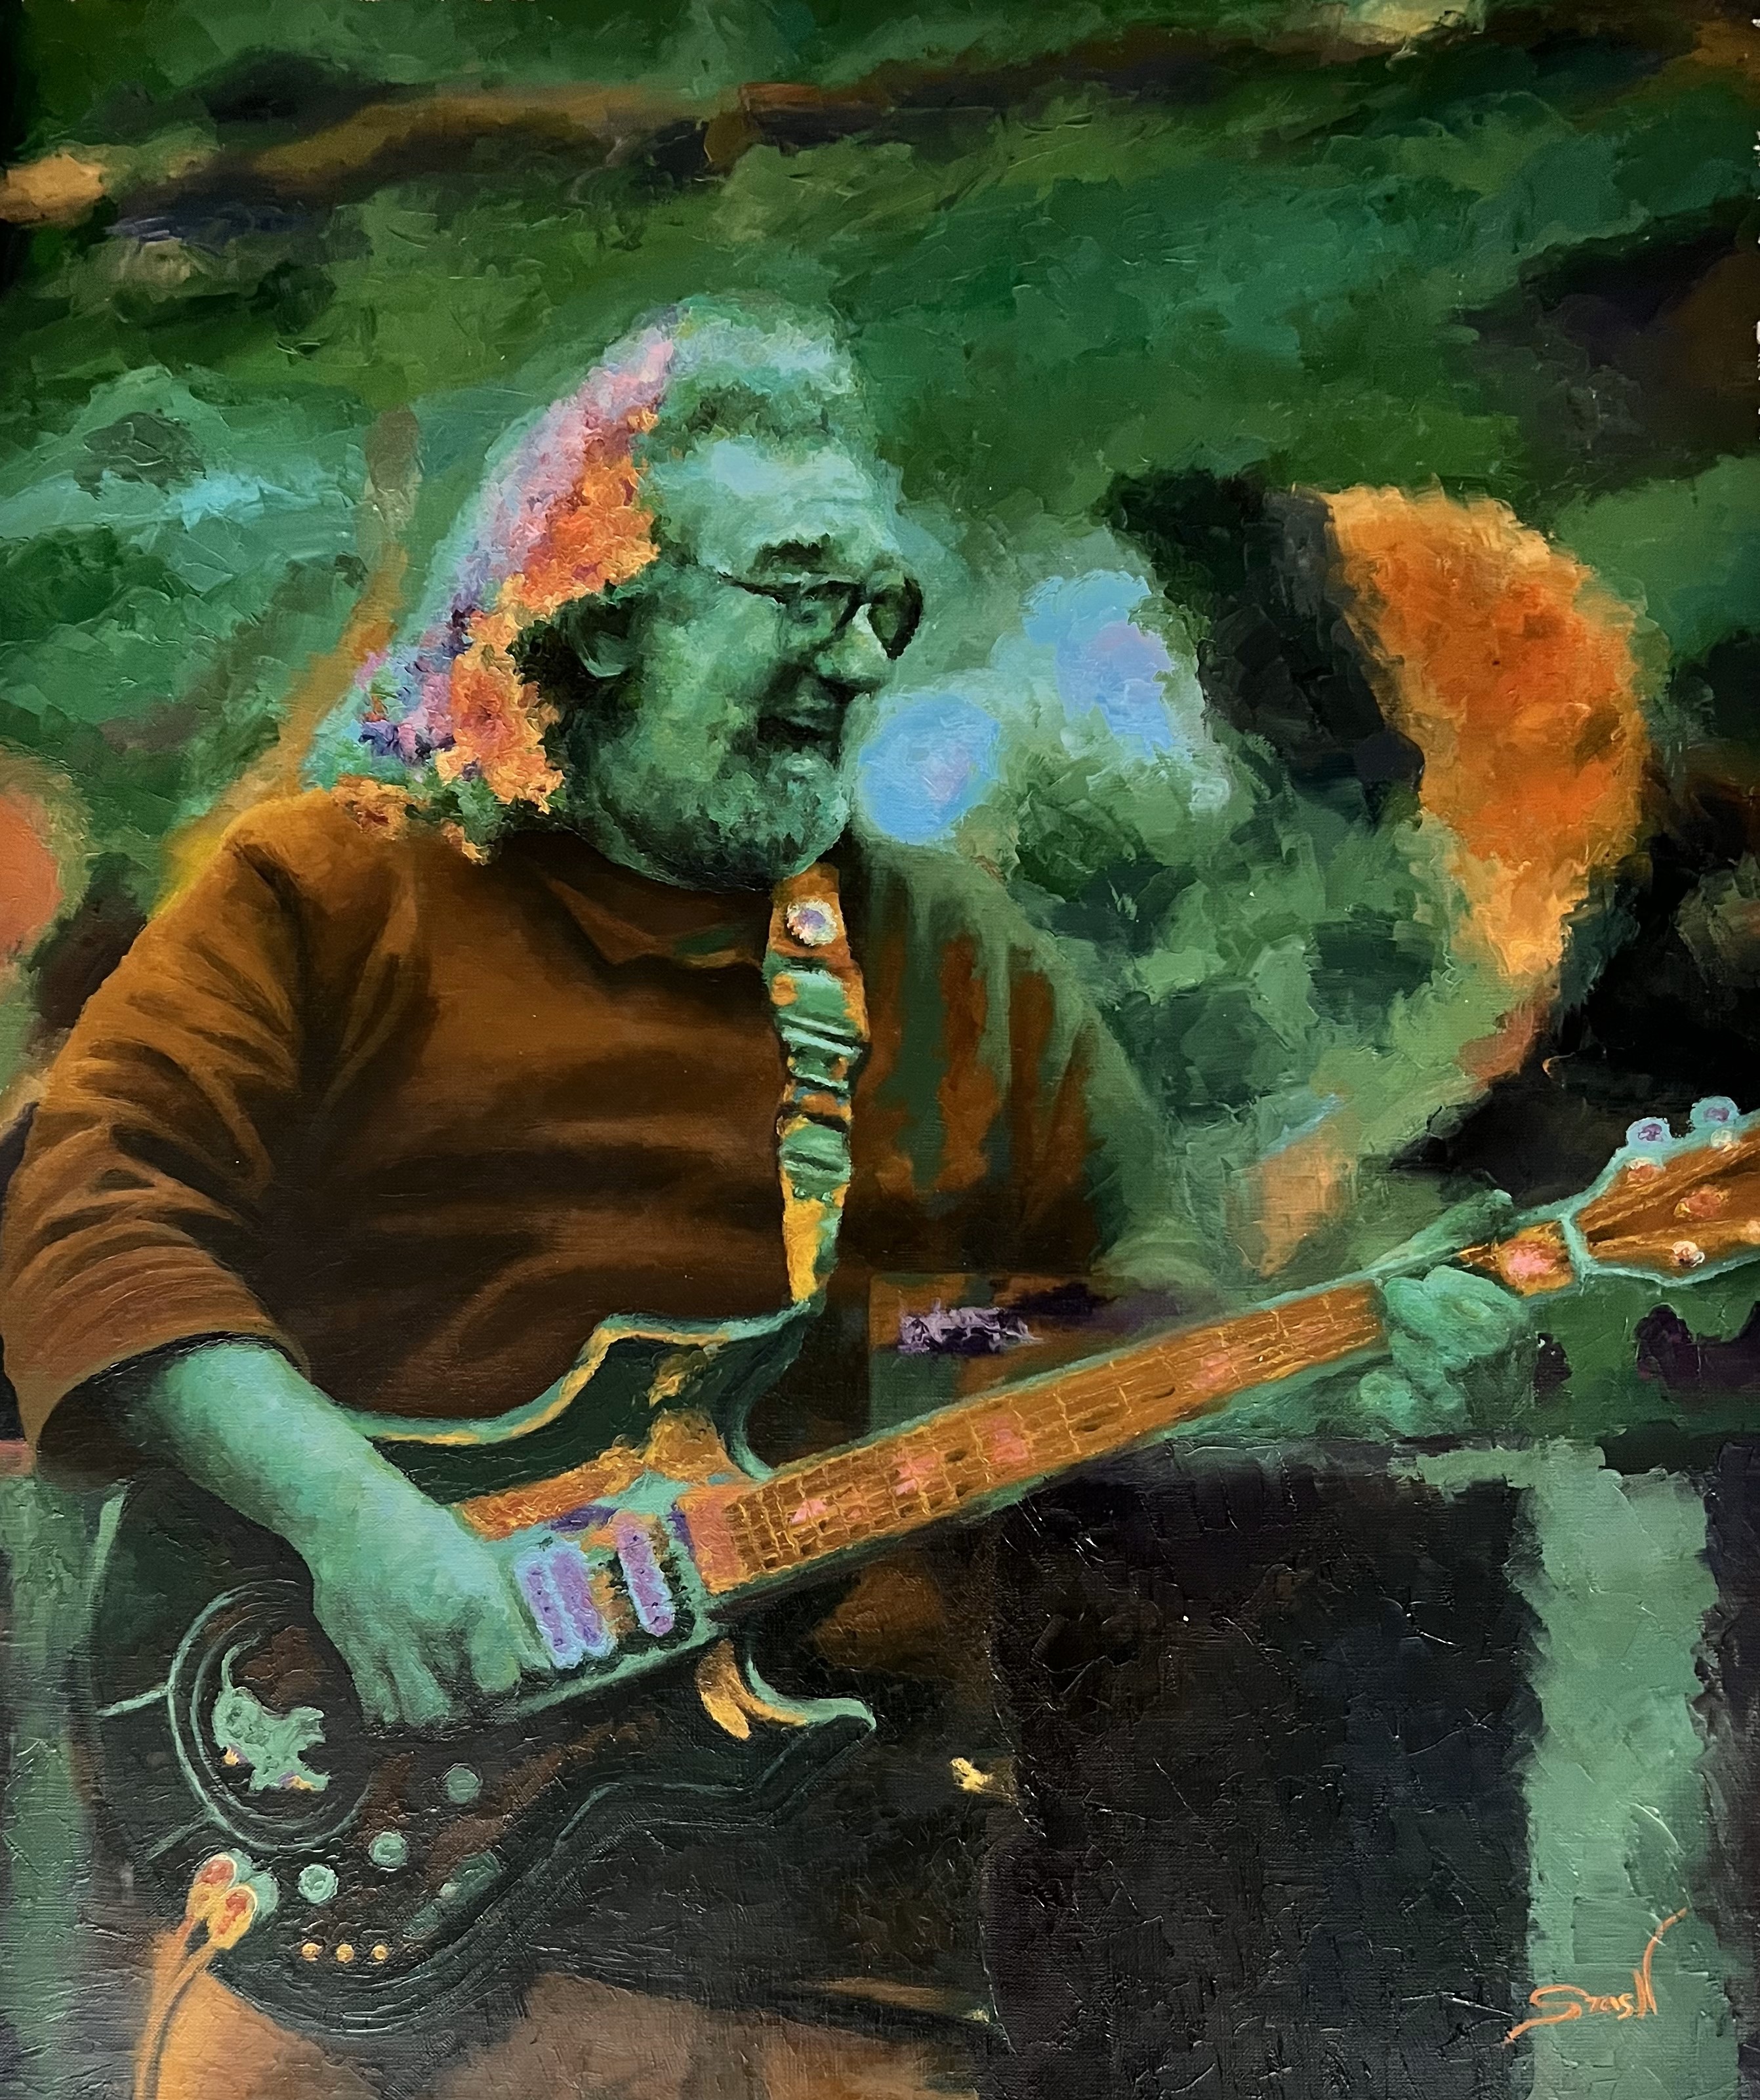 STAS NAMIN - Jerry Garcia - Oil on Canvas - 30x25 inches